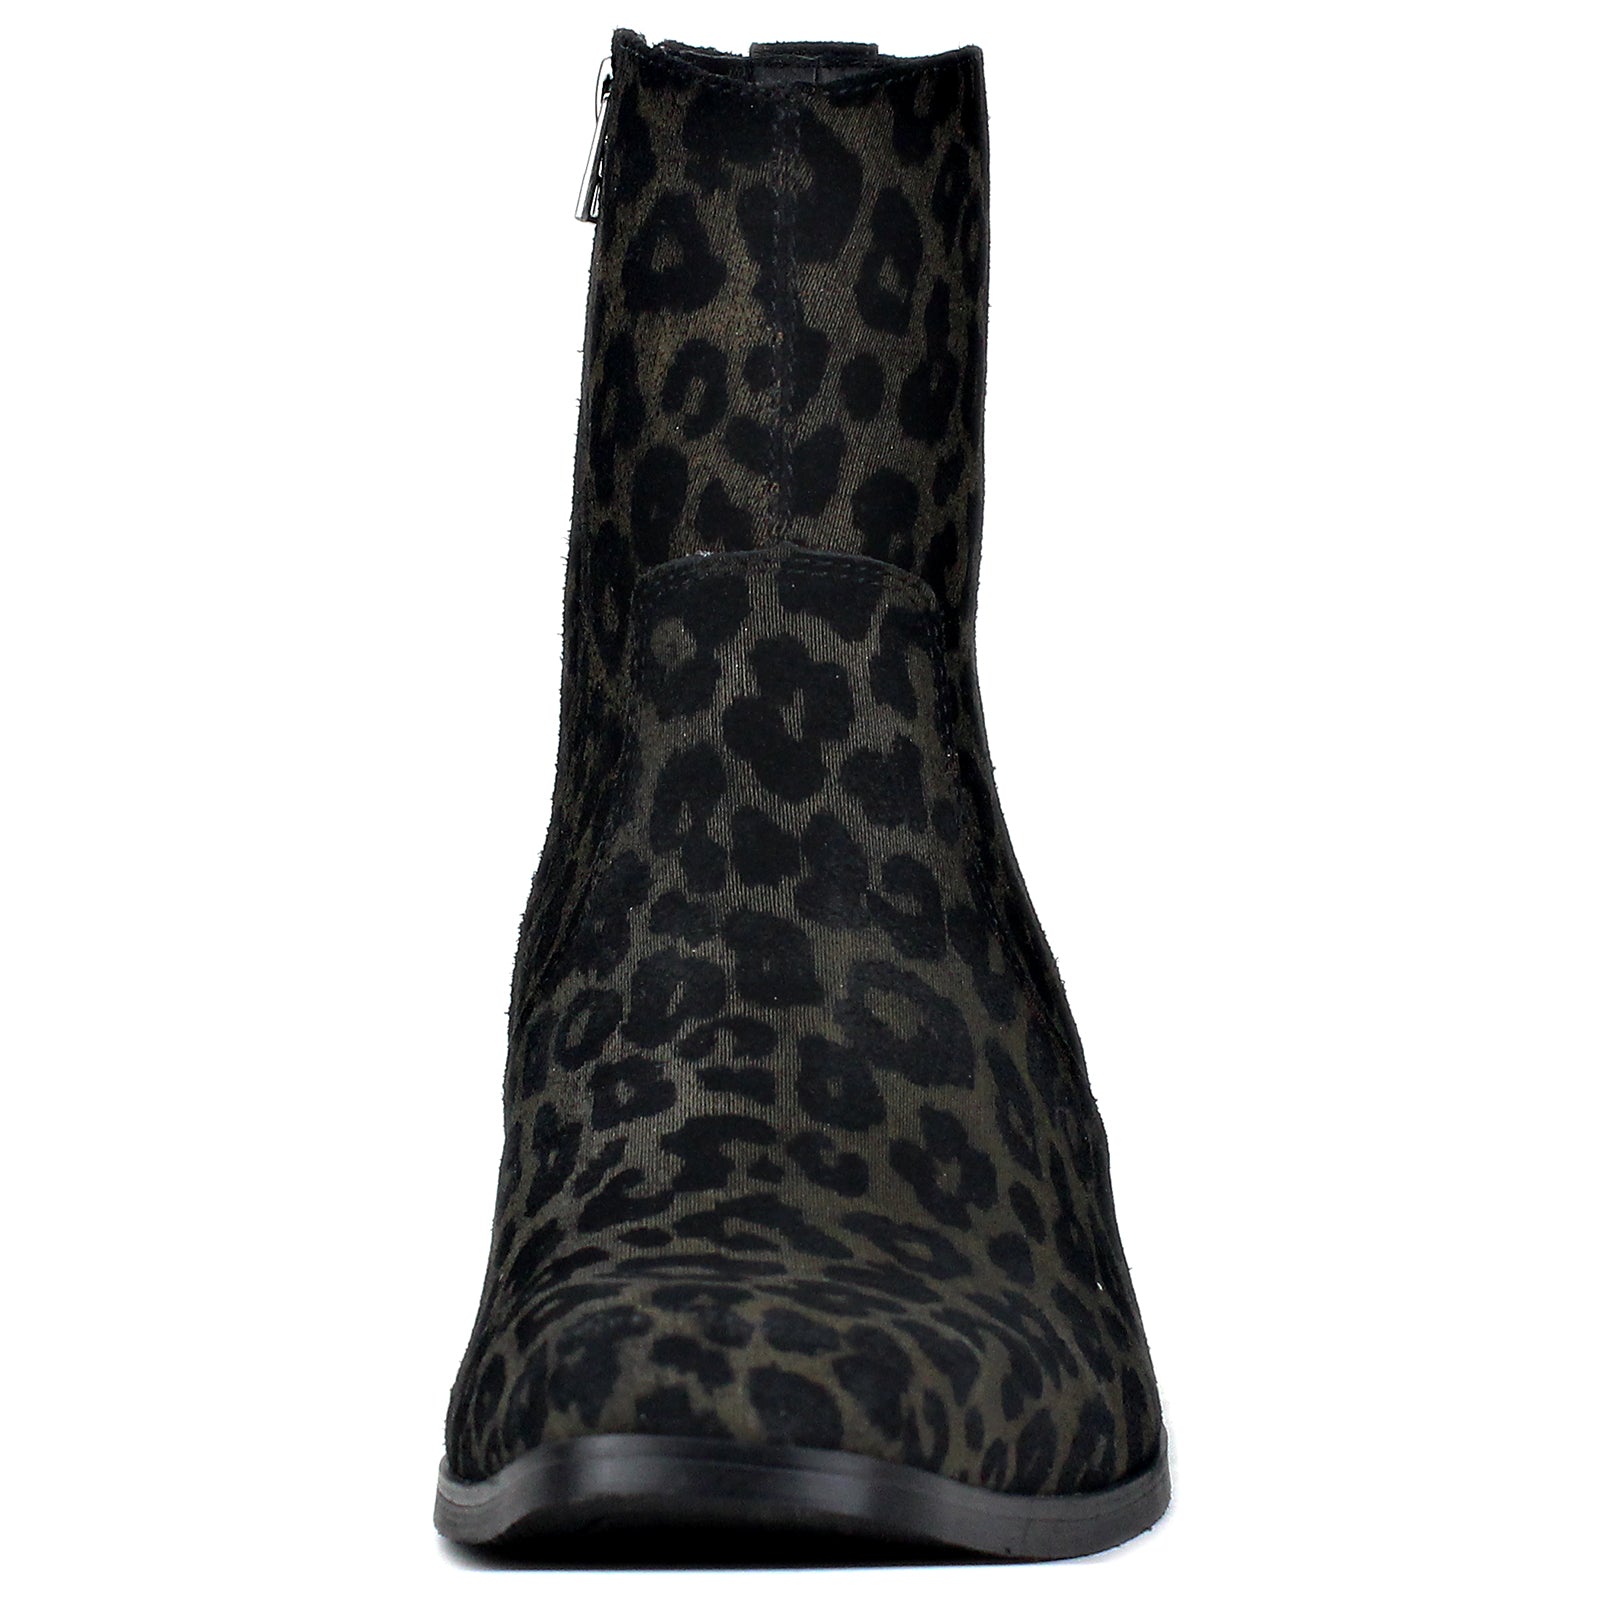 Wiipop Genuine Leather Horse Hair Leopard Boots